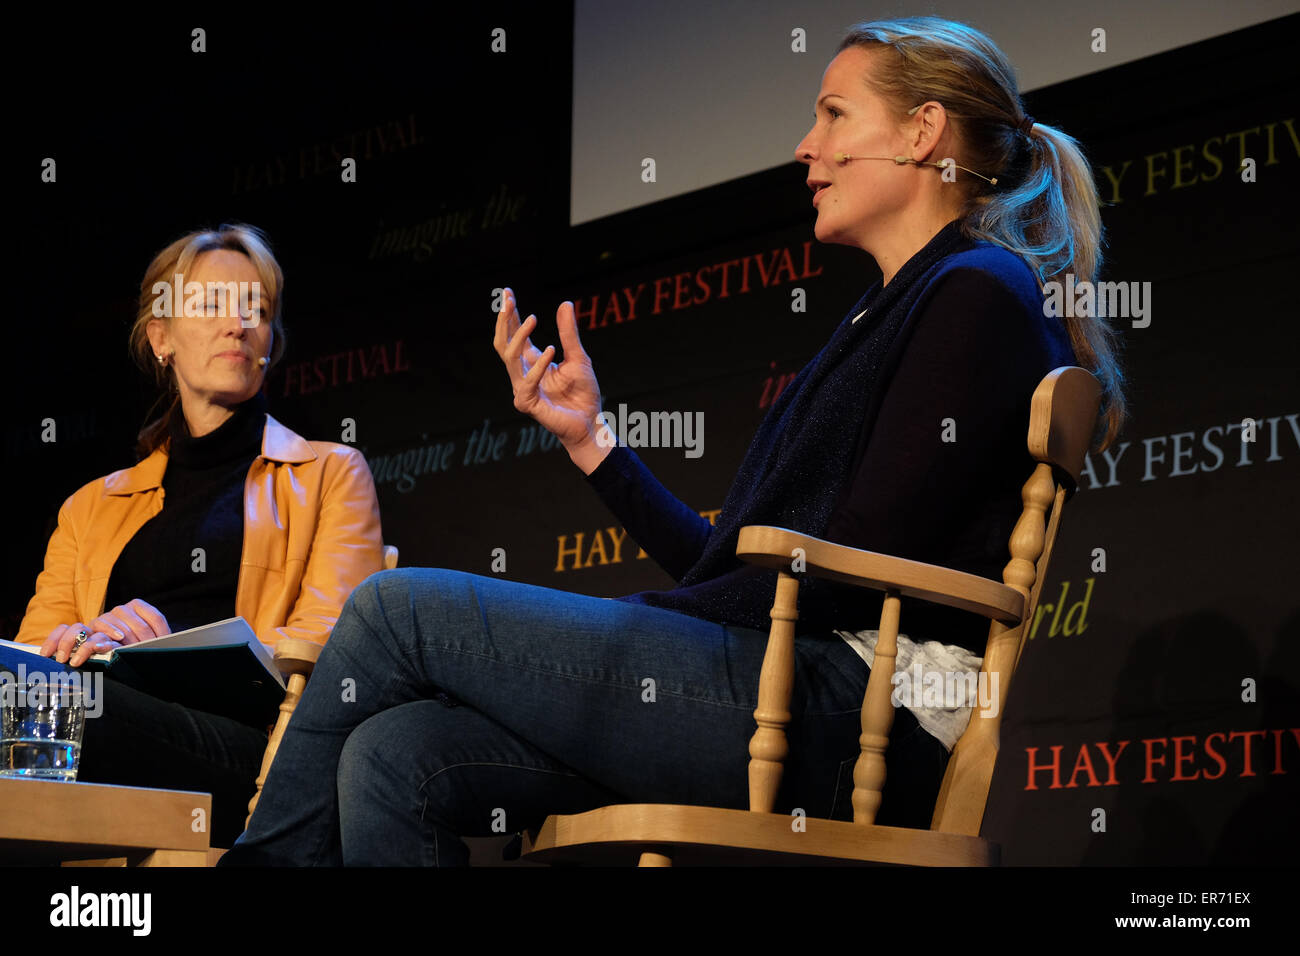 Hay Festival, Powys, Wales - May 2015  -  Author Asne Seierstad on stage talking about her new book One of Us - The Story of Anders Breivik and the Massacre in Norway being interviewed by Francine Stock. Stock Photo